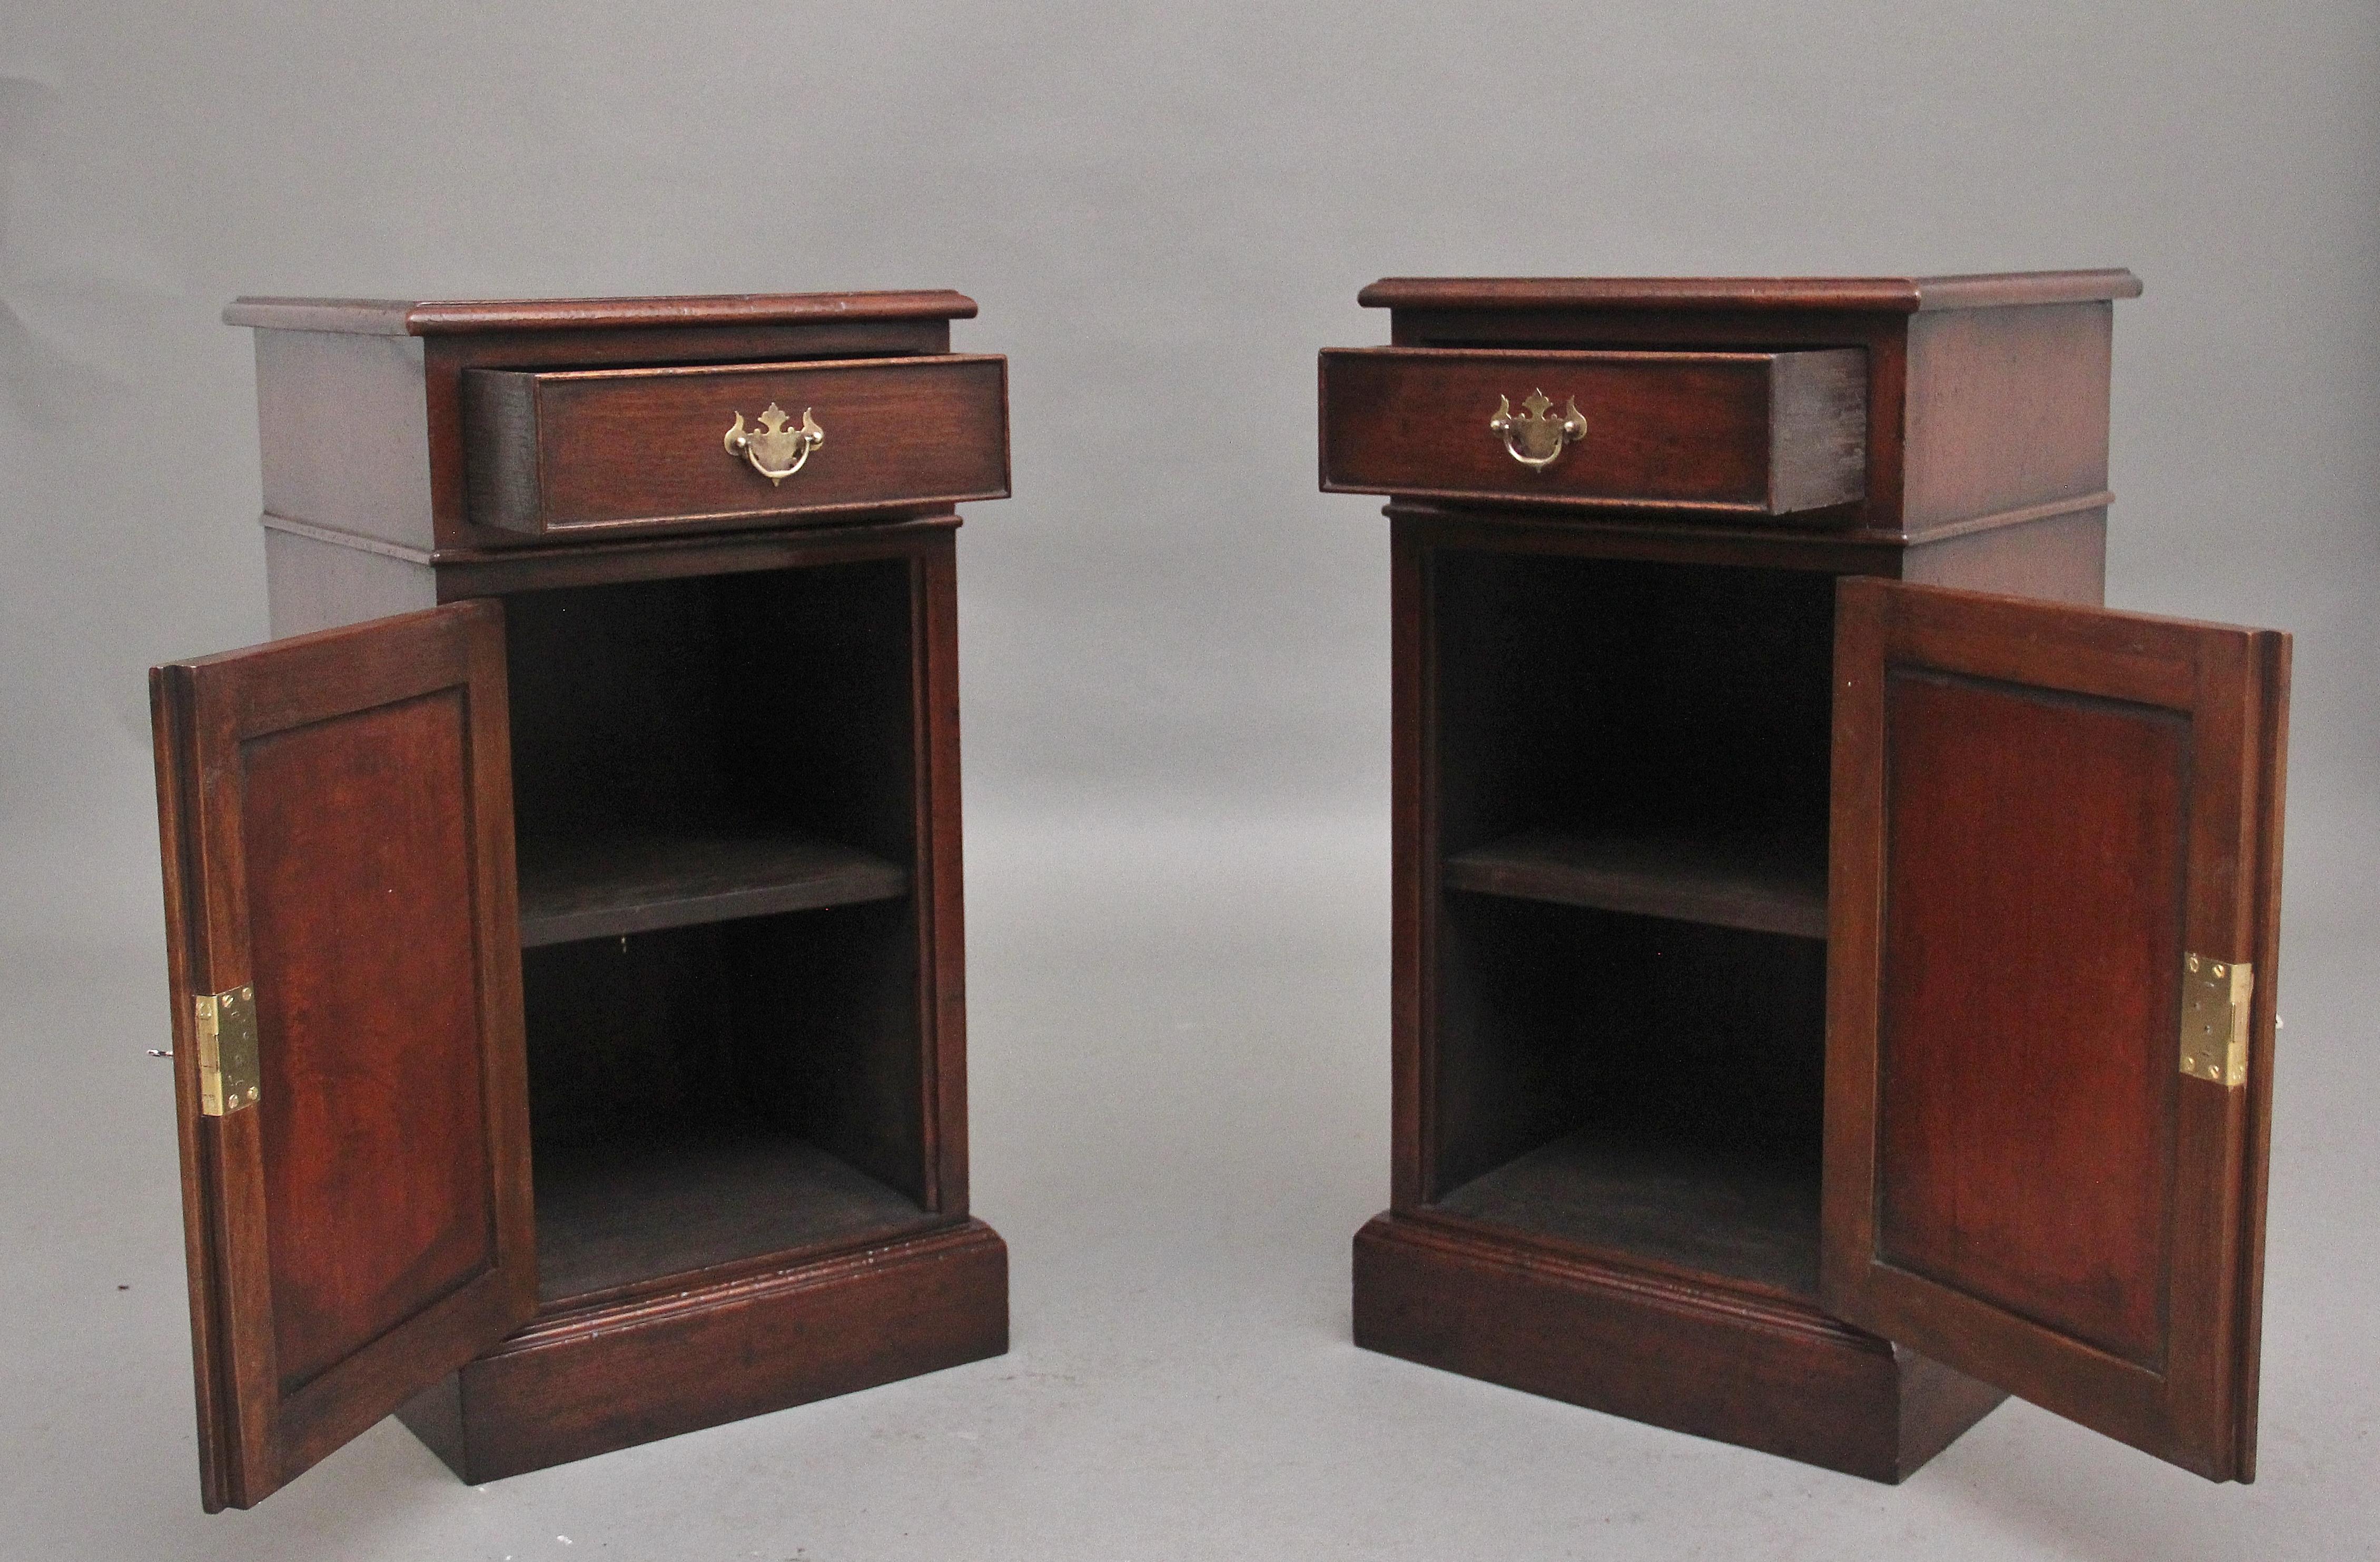 A pair of mid 20th Century mahogany bedside cabinets, having a nice figured and moulded edge top above a single drawer with a brass plate handle, cupboard below with a paneled door opening to reveal a single shelf inside, supported on a deep plinth